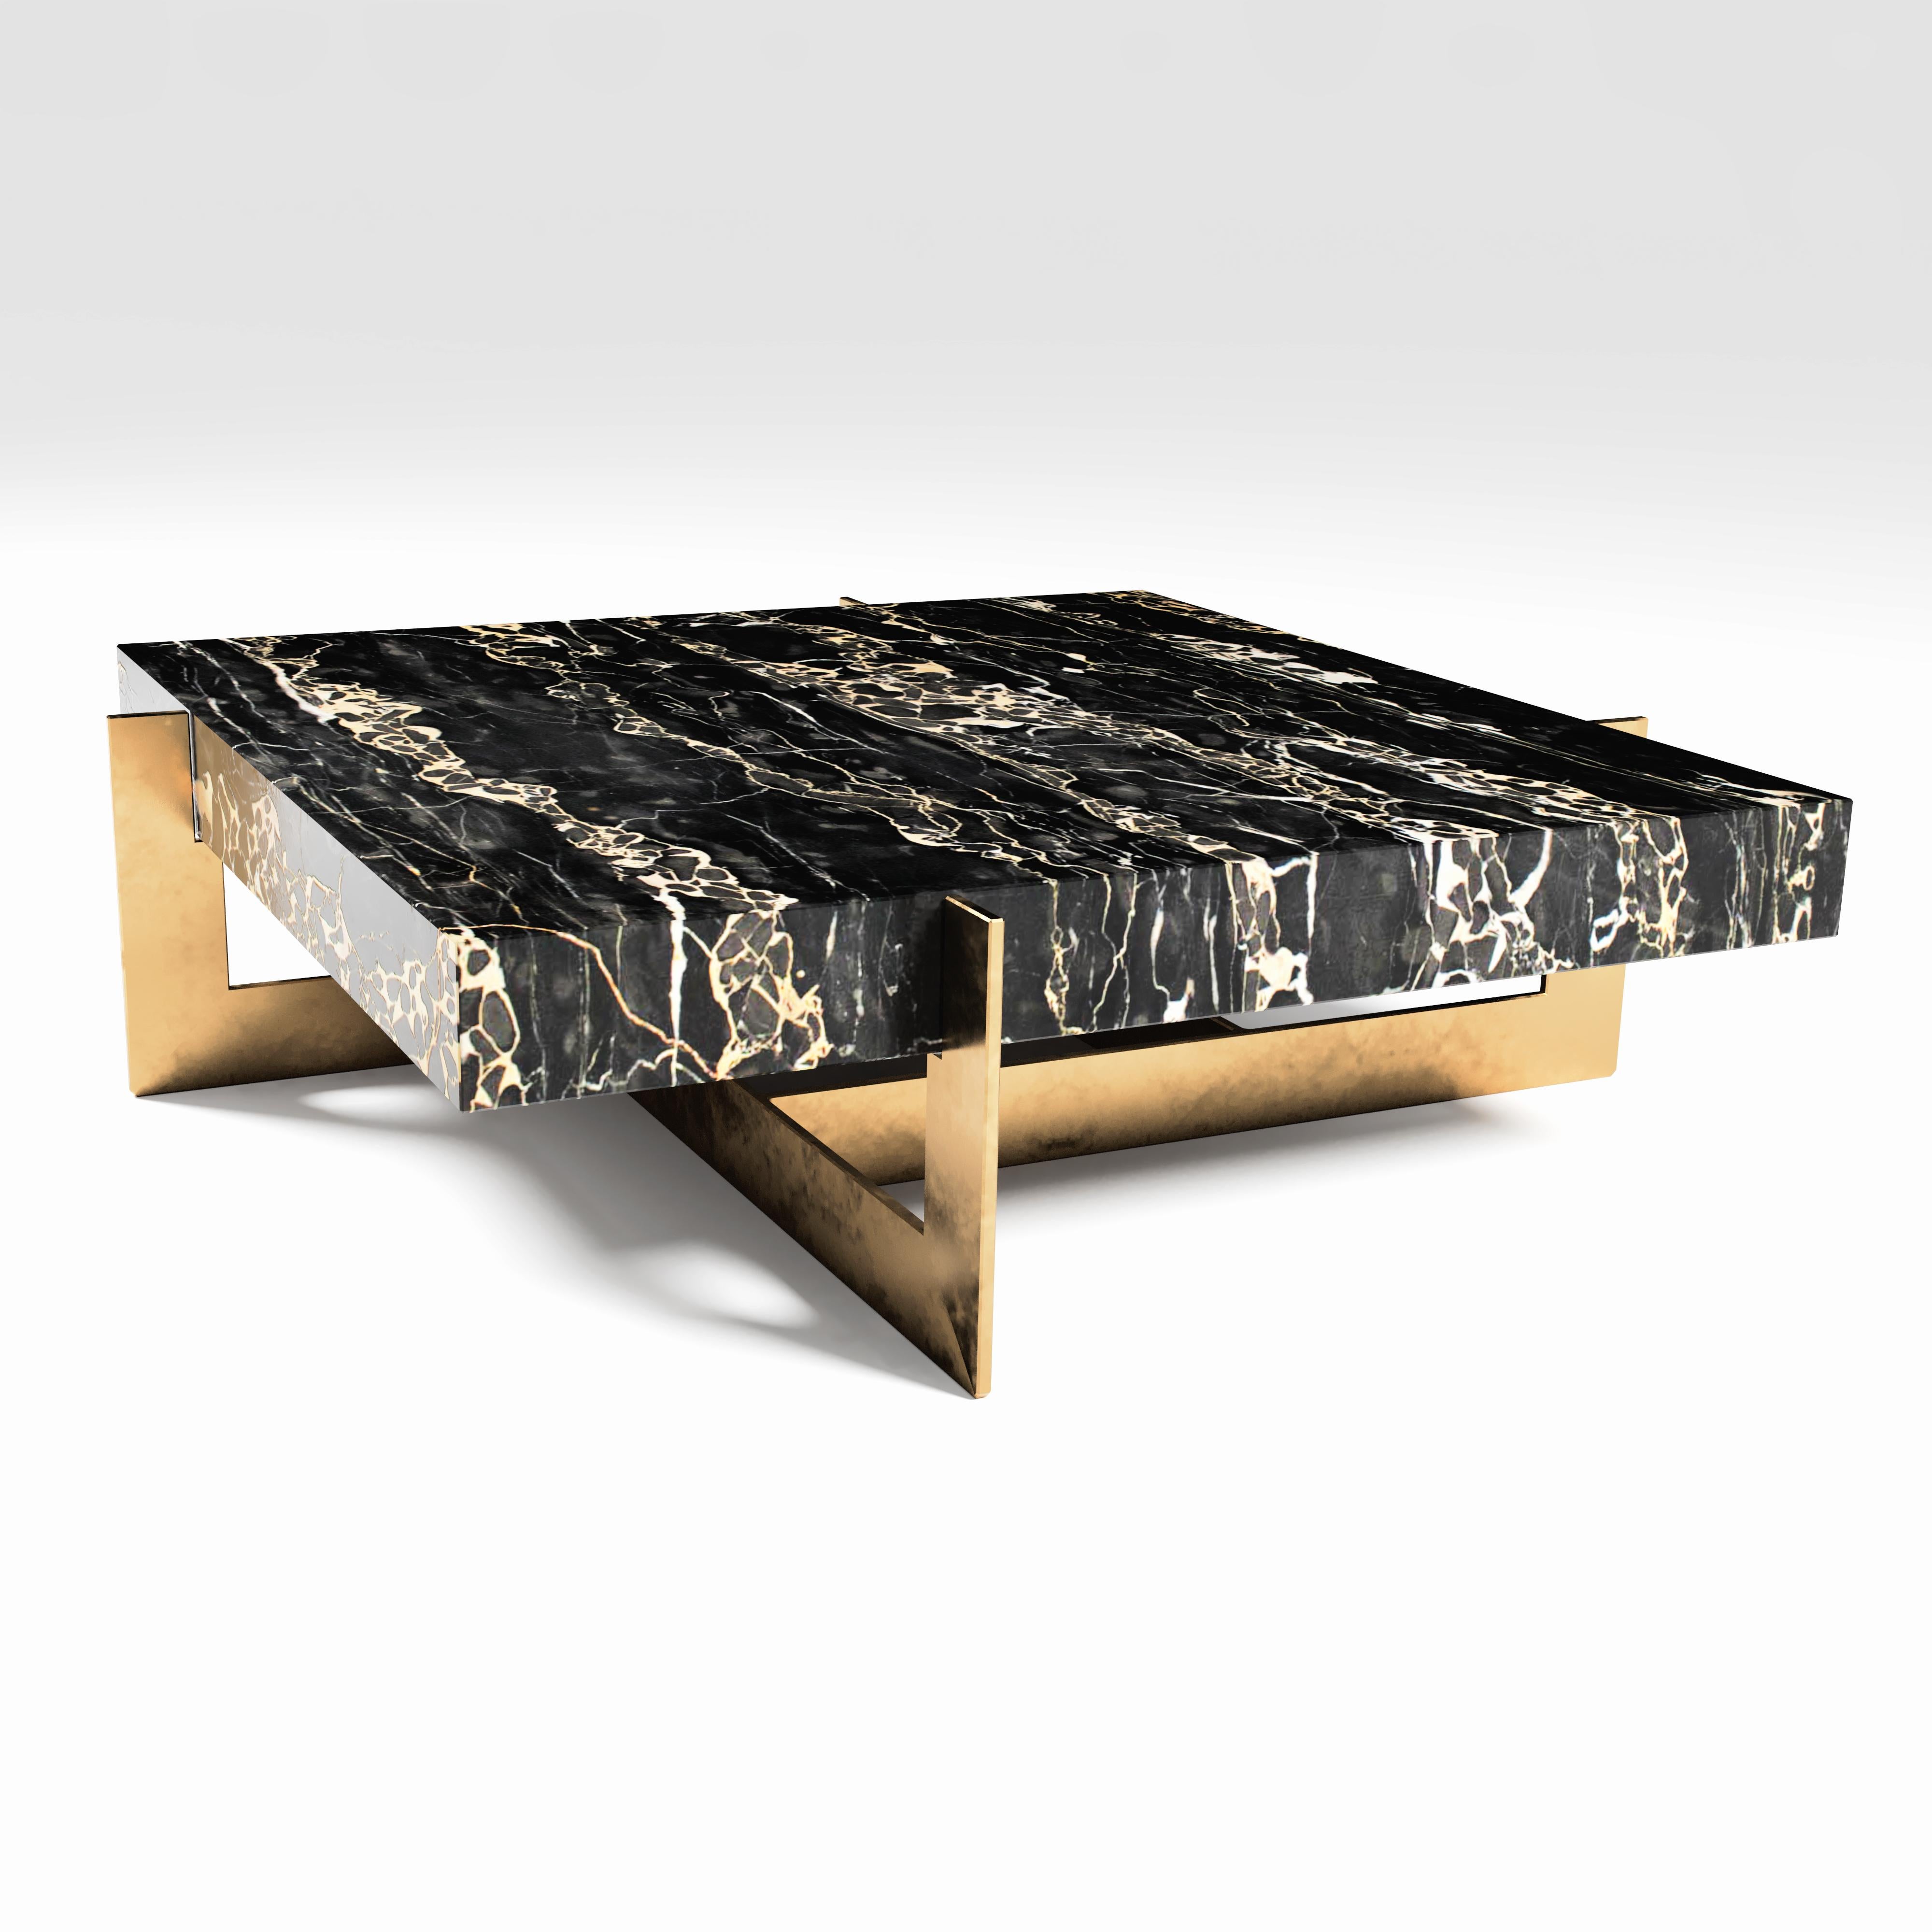 The Golden Rock II coffee table, limited edition by Grzegorz Majka
Edition 1 of 8
Dimensions: 39.37 x 39.37 x 11.81 in
Materials: Marble and Solid Brass

When one hears the term, “Golden Rock”, it’s hard not to envisage scenes of regal beauty.